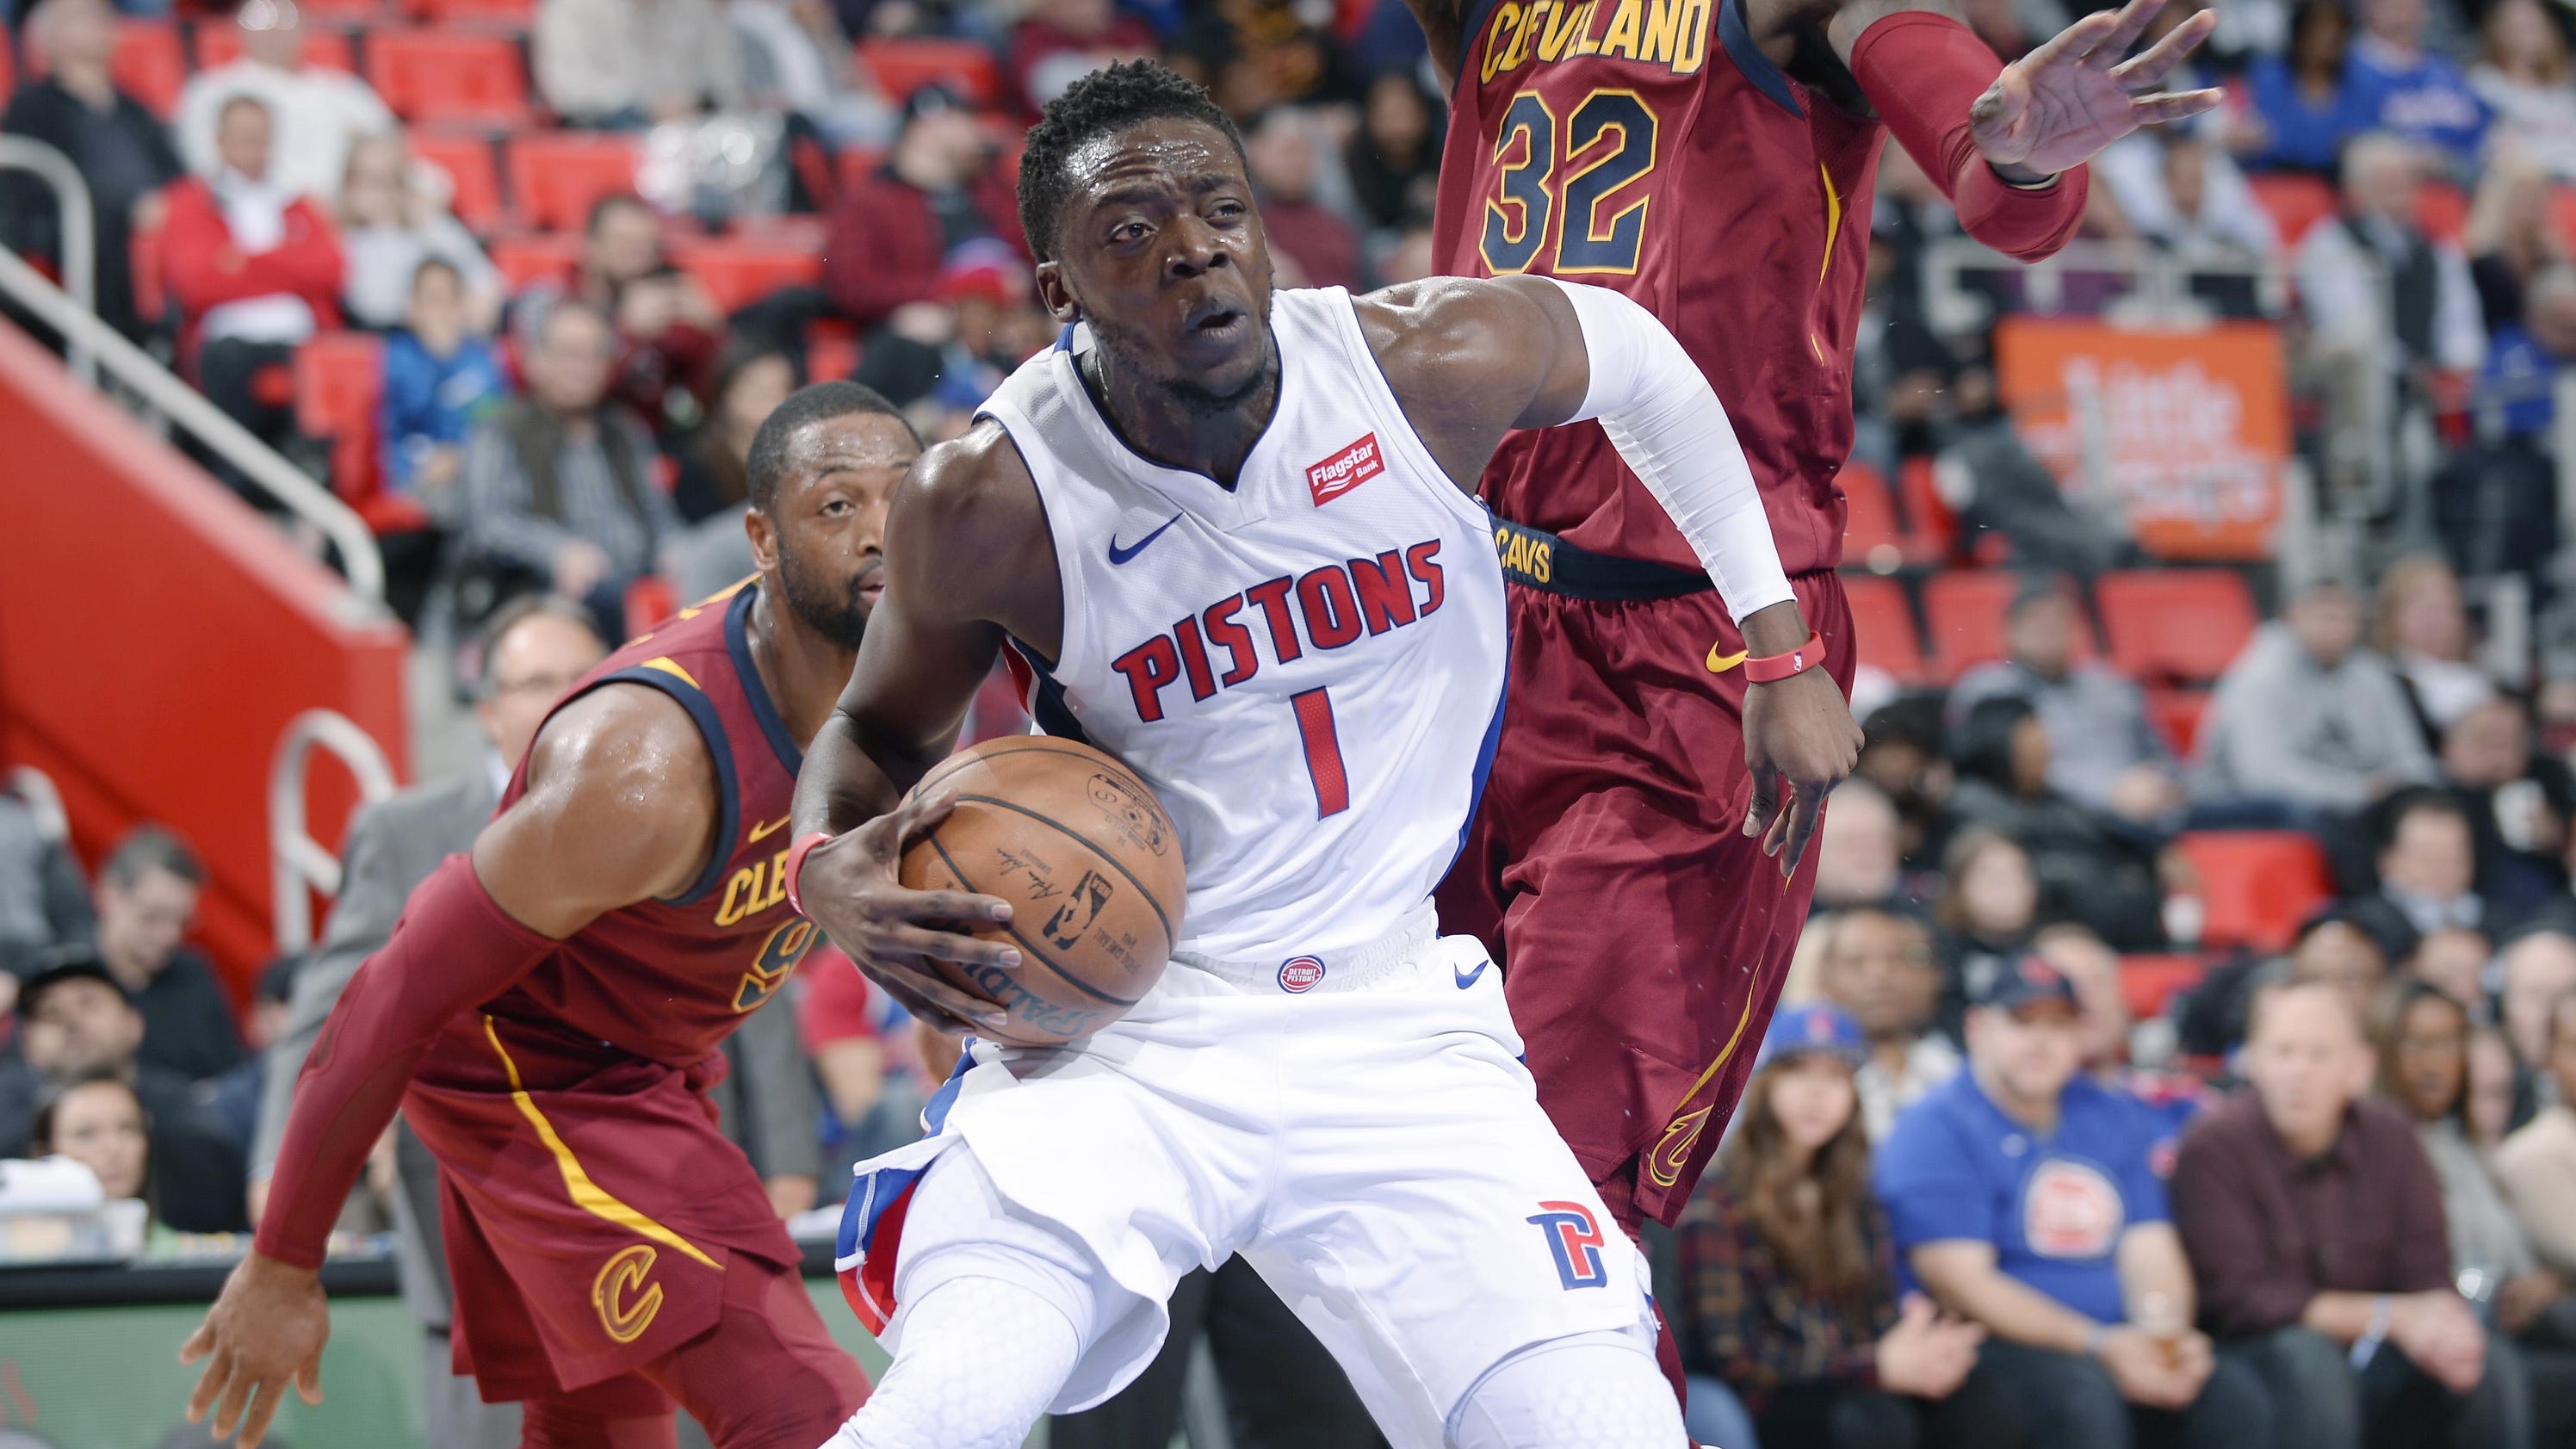 Pistons mailbag: Let’s see if ‘Big 3’ can work